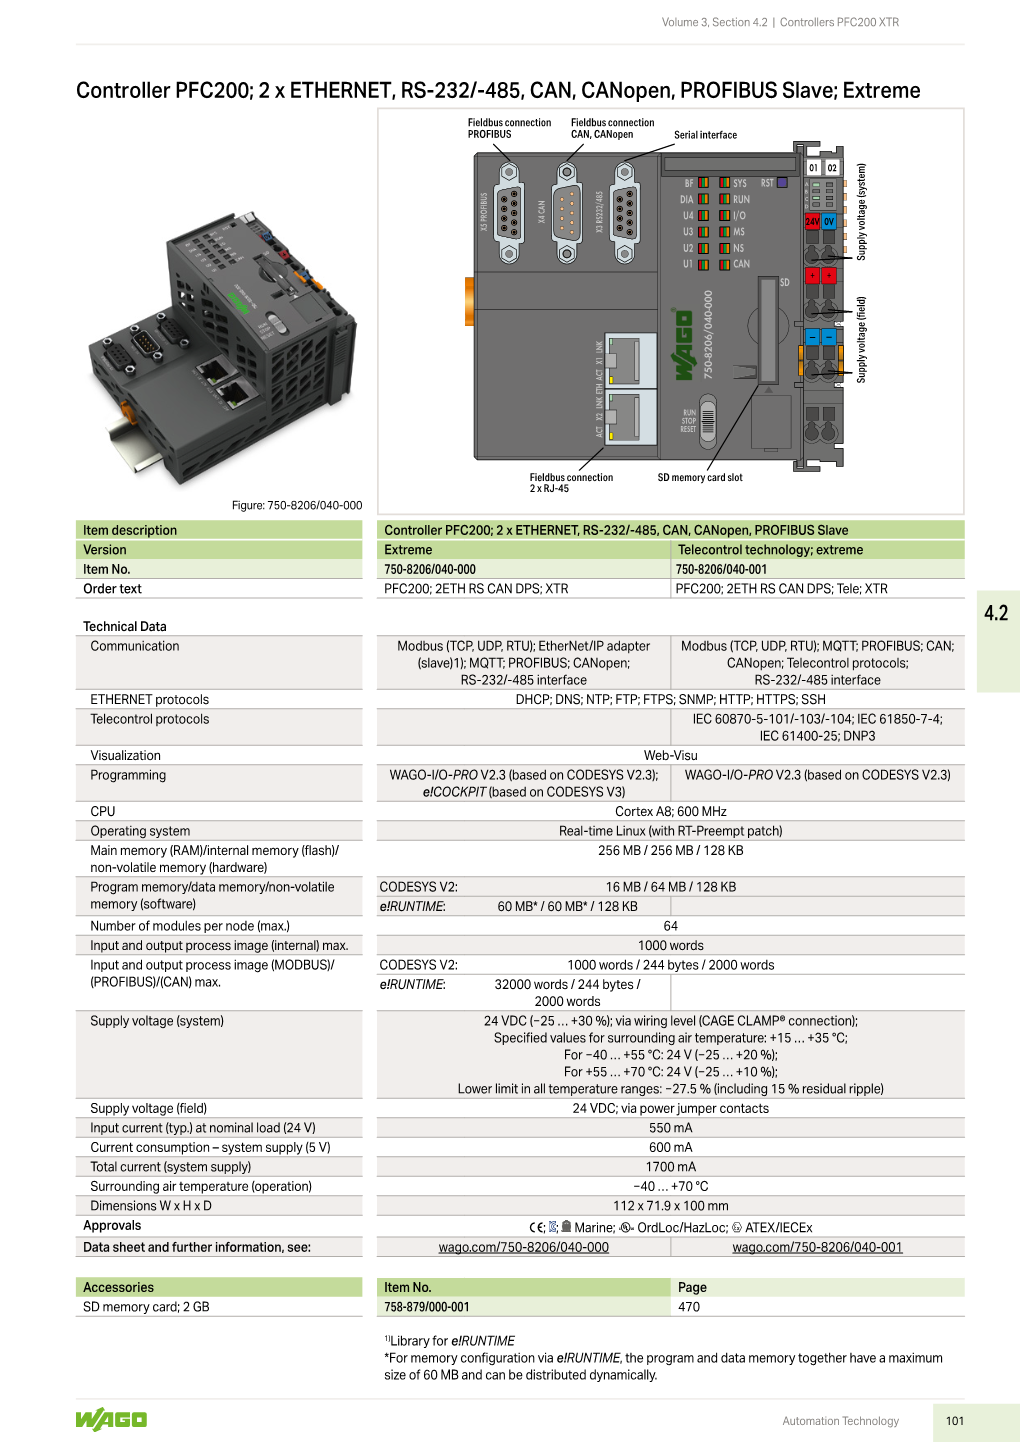 4.2 Controller PFC200; 2 X ETHERNET, RS-232